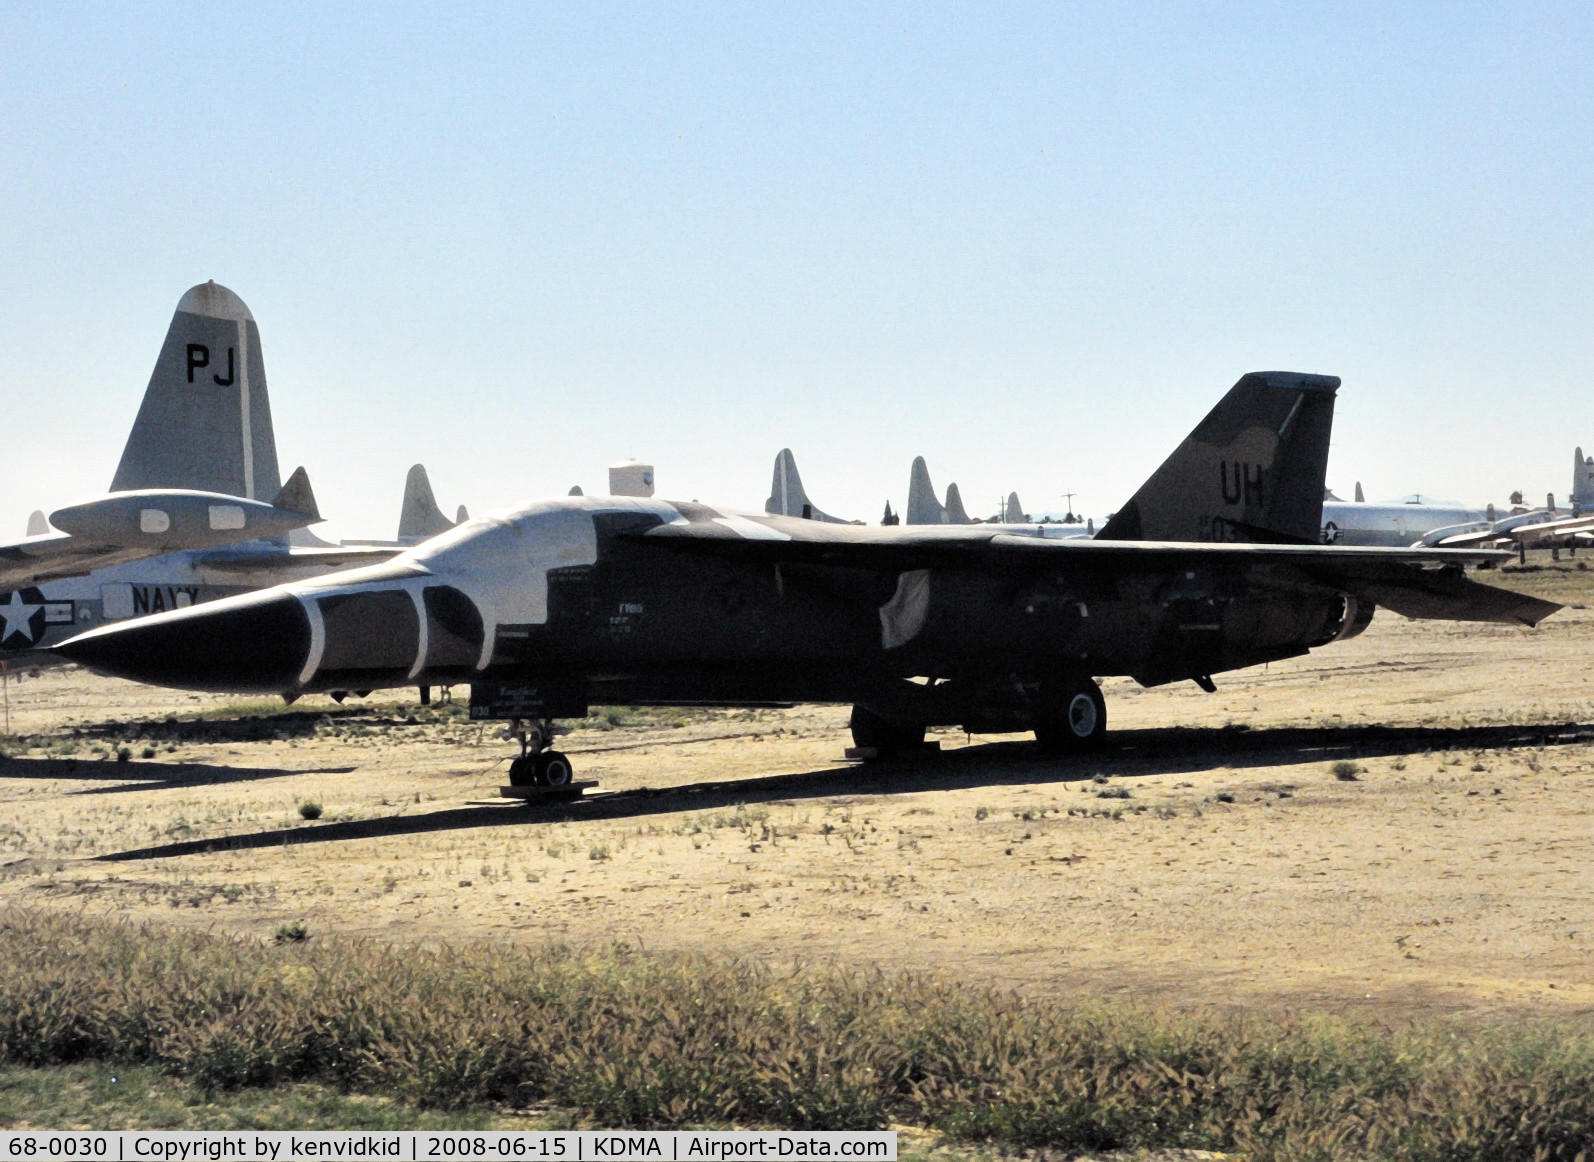 68-0030, 1968 General Dynamics F-111E Aardvark C/N A1-199, At Davis Monthan from an air-conditioned bus, circa 1996.